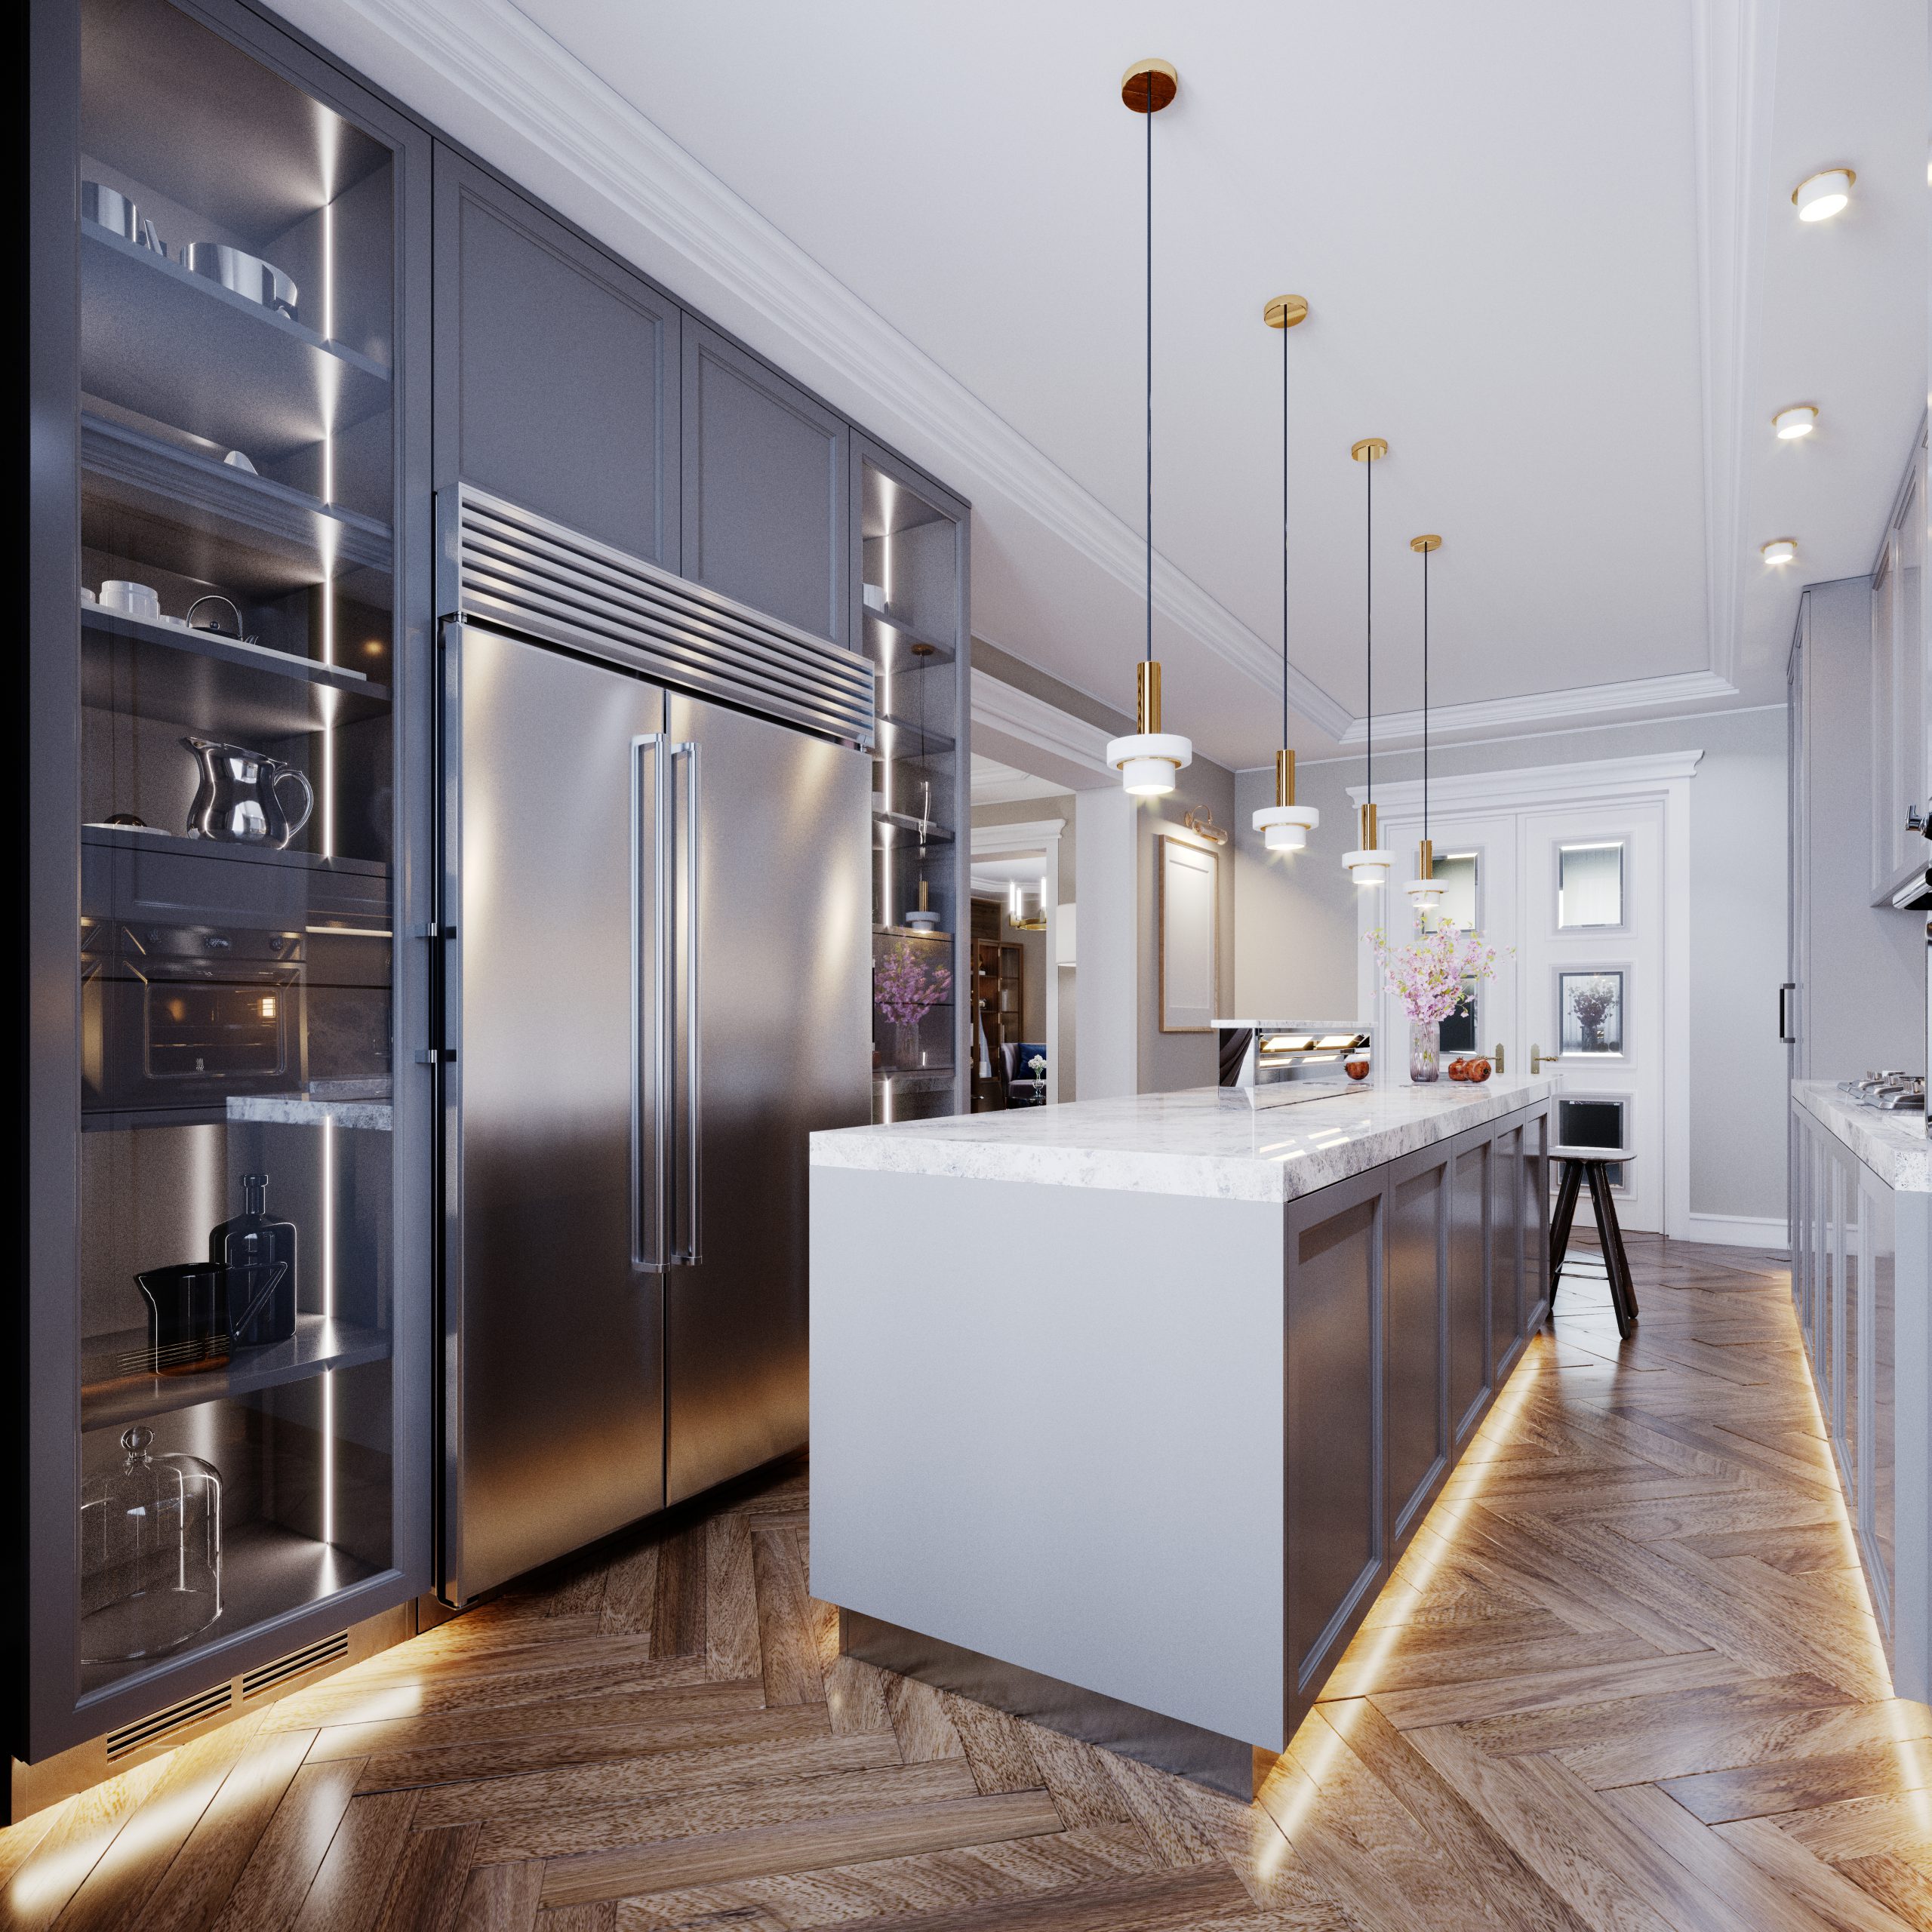 Fashionable modern kitchen with gray contemporary furniture, a kitchen island with a bar counter and two chairs, beige walls and parquet floor.